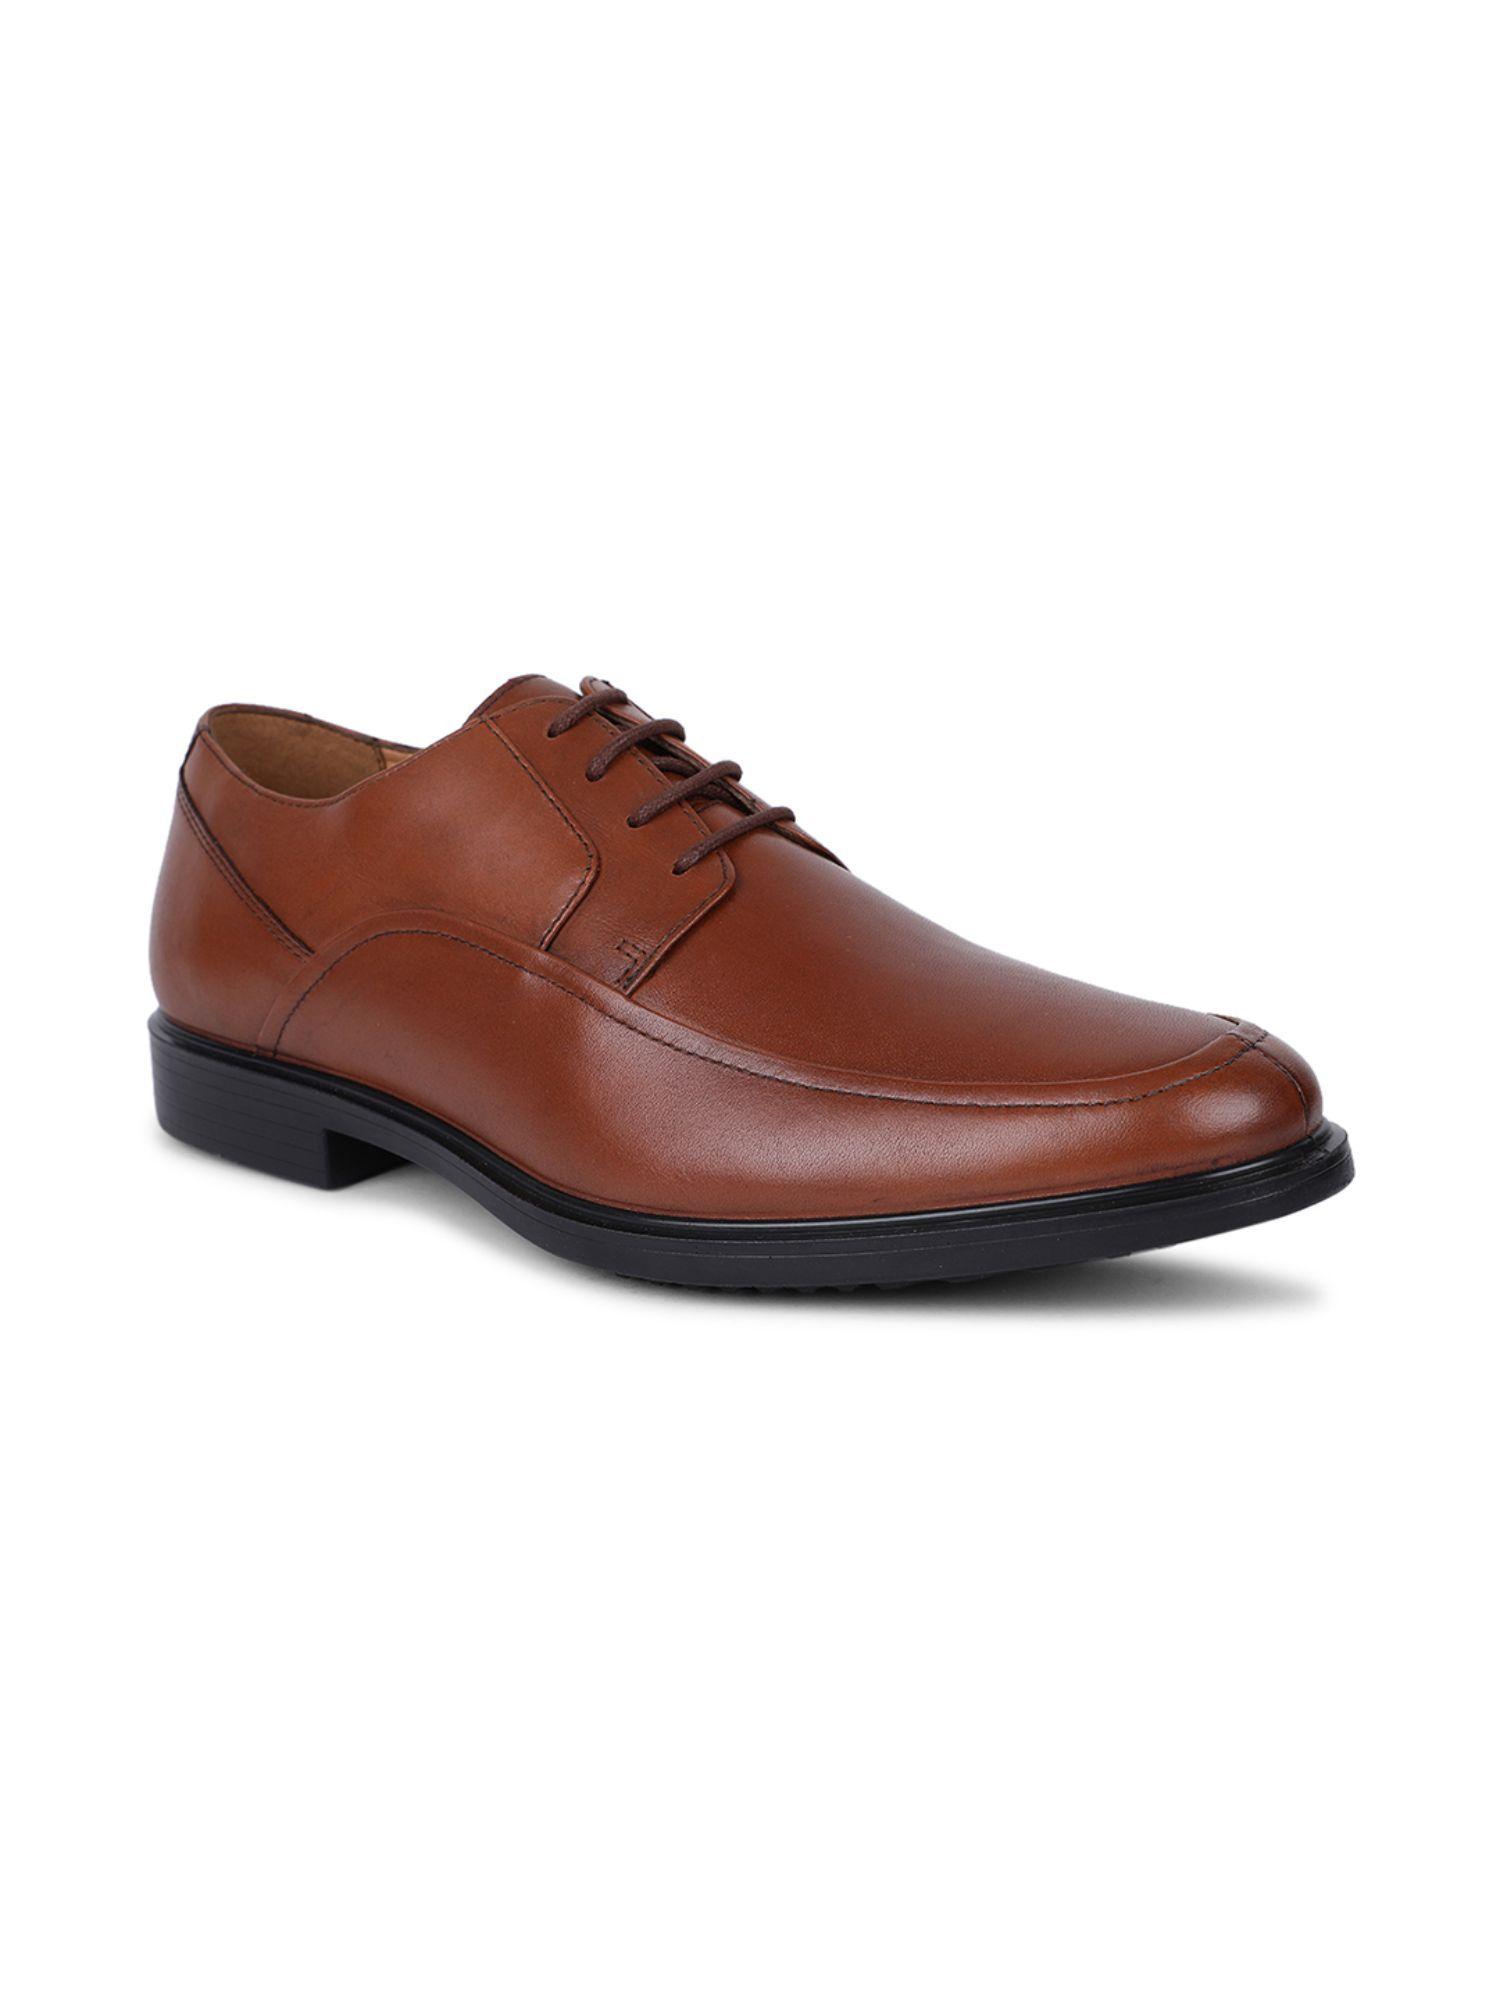 Solid Brown Formal Shoes